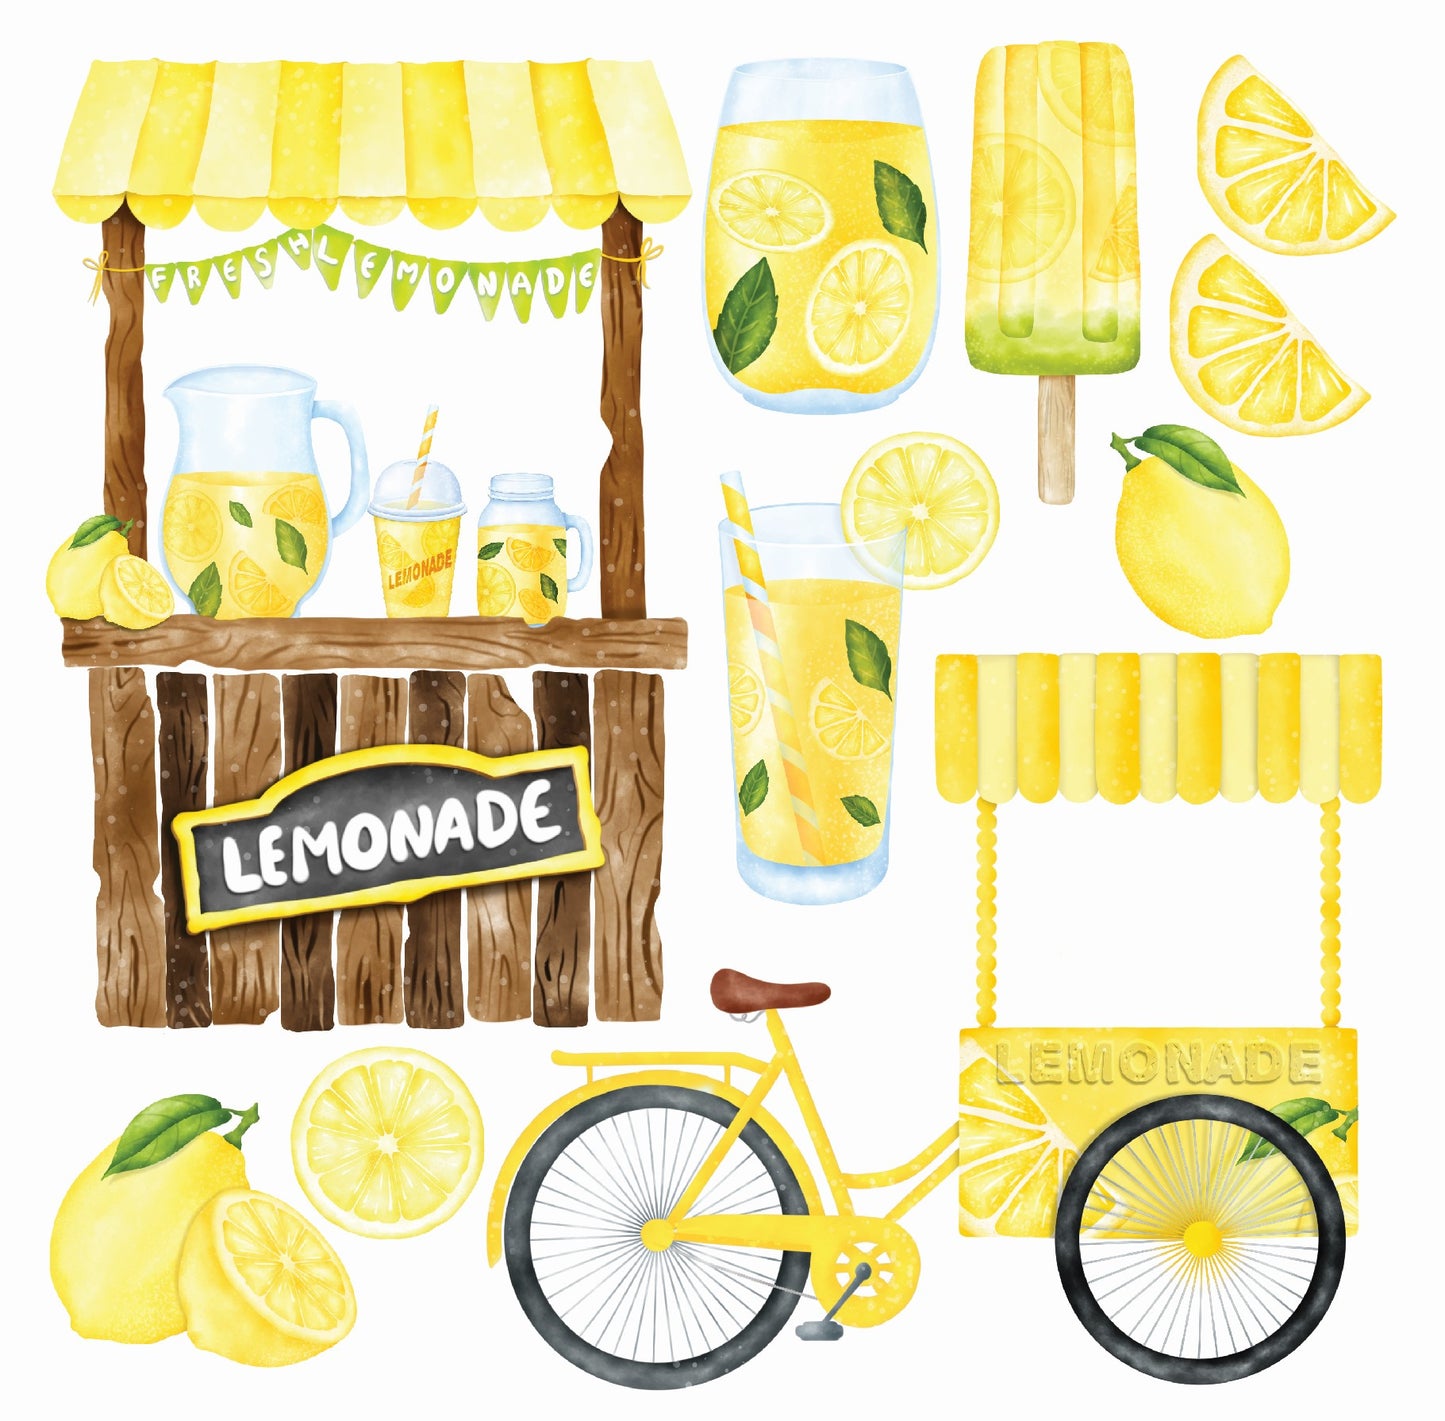 Lemonade Stand Half Sheet Misc. (Must Purchase 2 Half sheets - You Can Mix & Match)